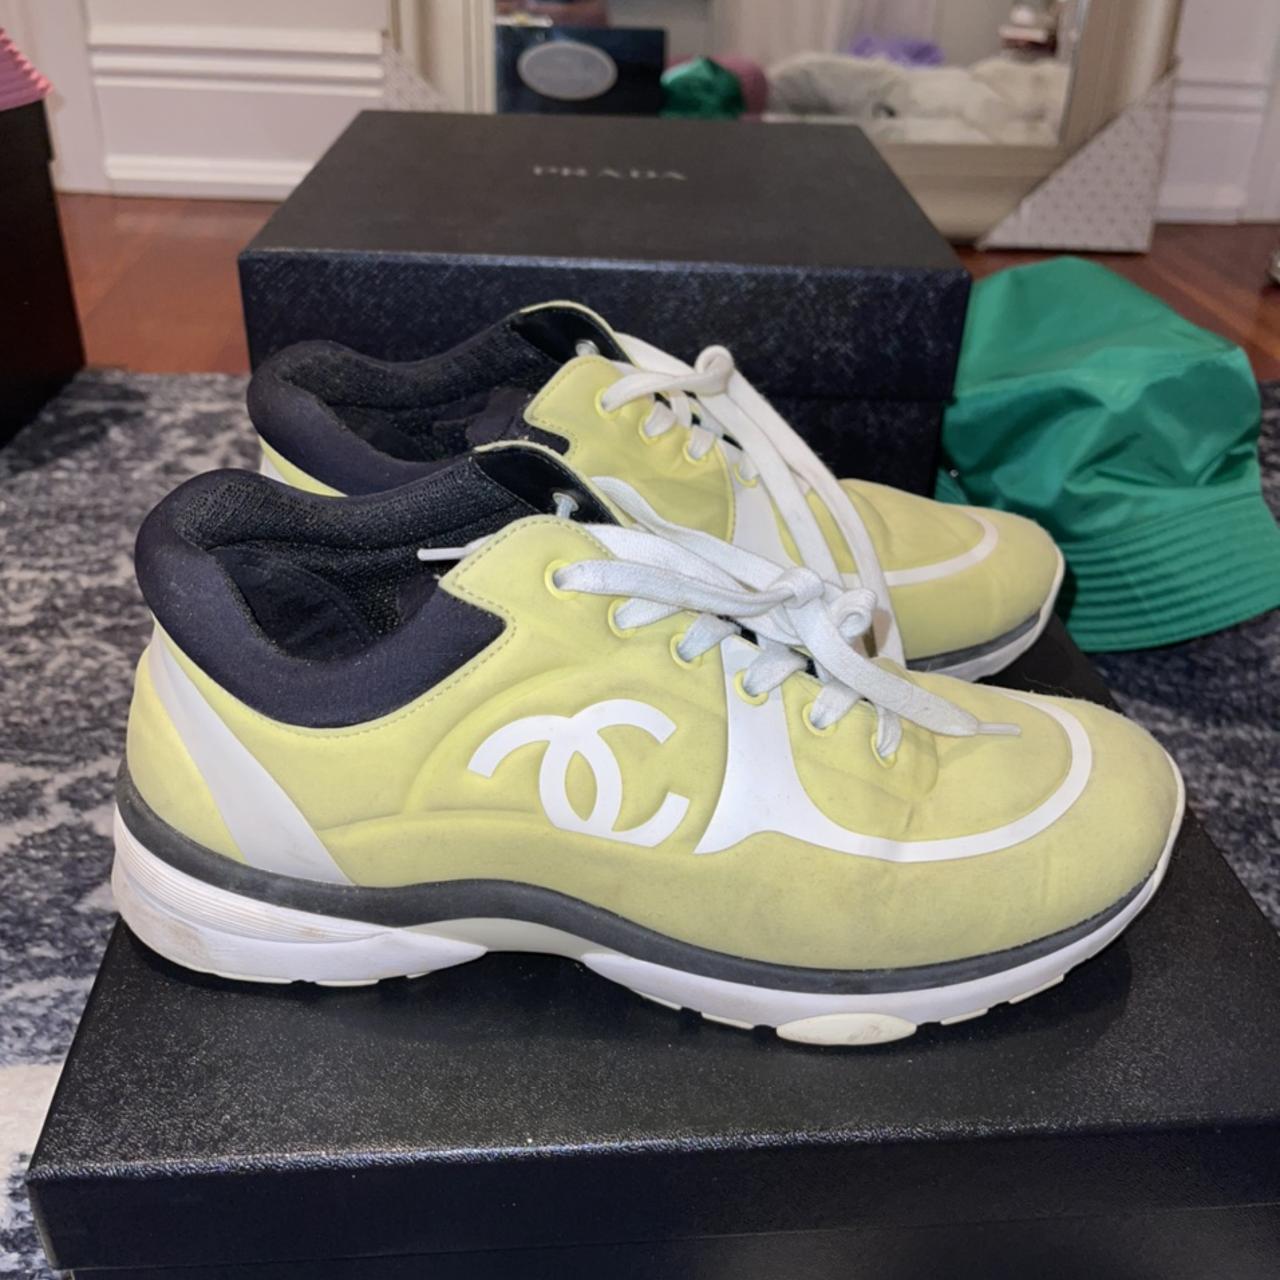 Chanel Women's Yellow and Black Trainers | Depop